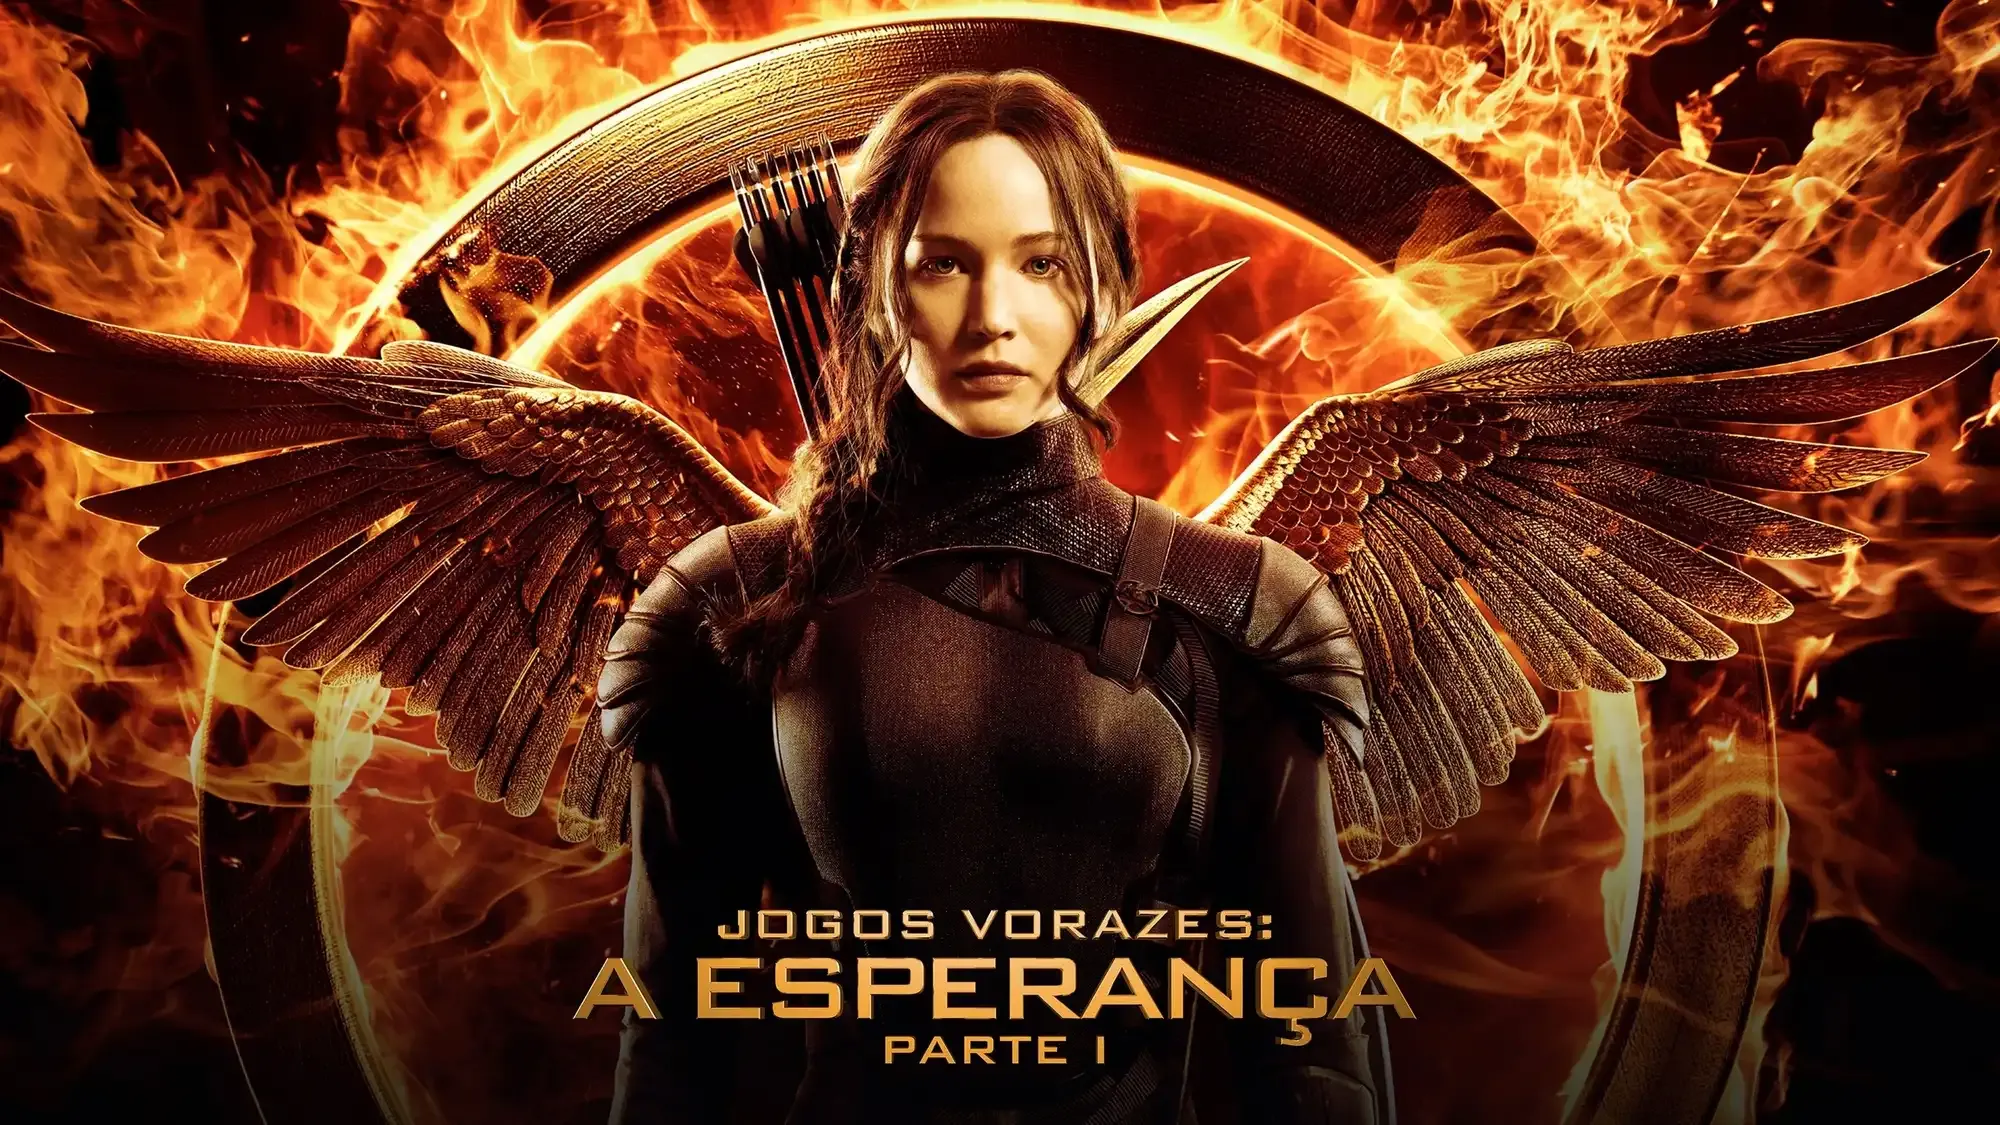 The Hunger Games: Mockingjay - Part 1 movie review